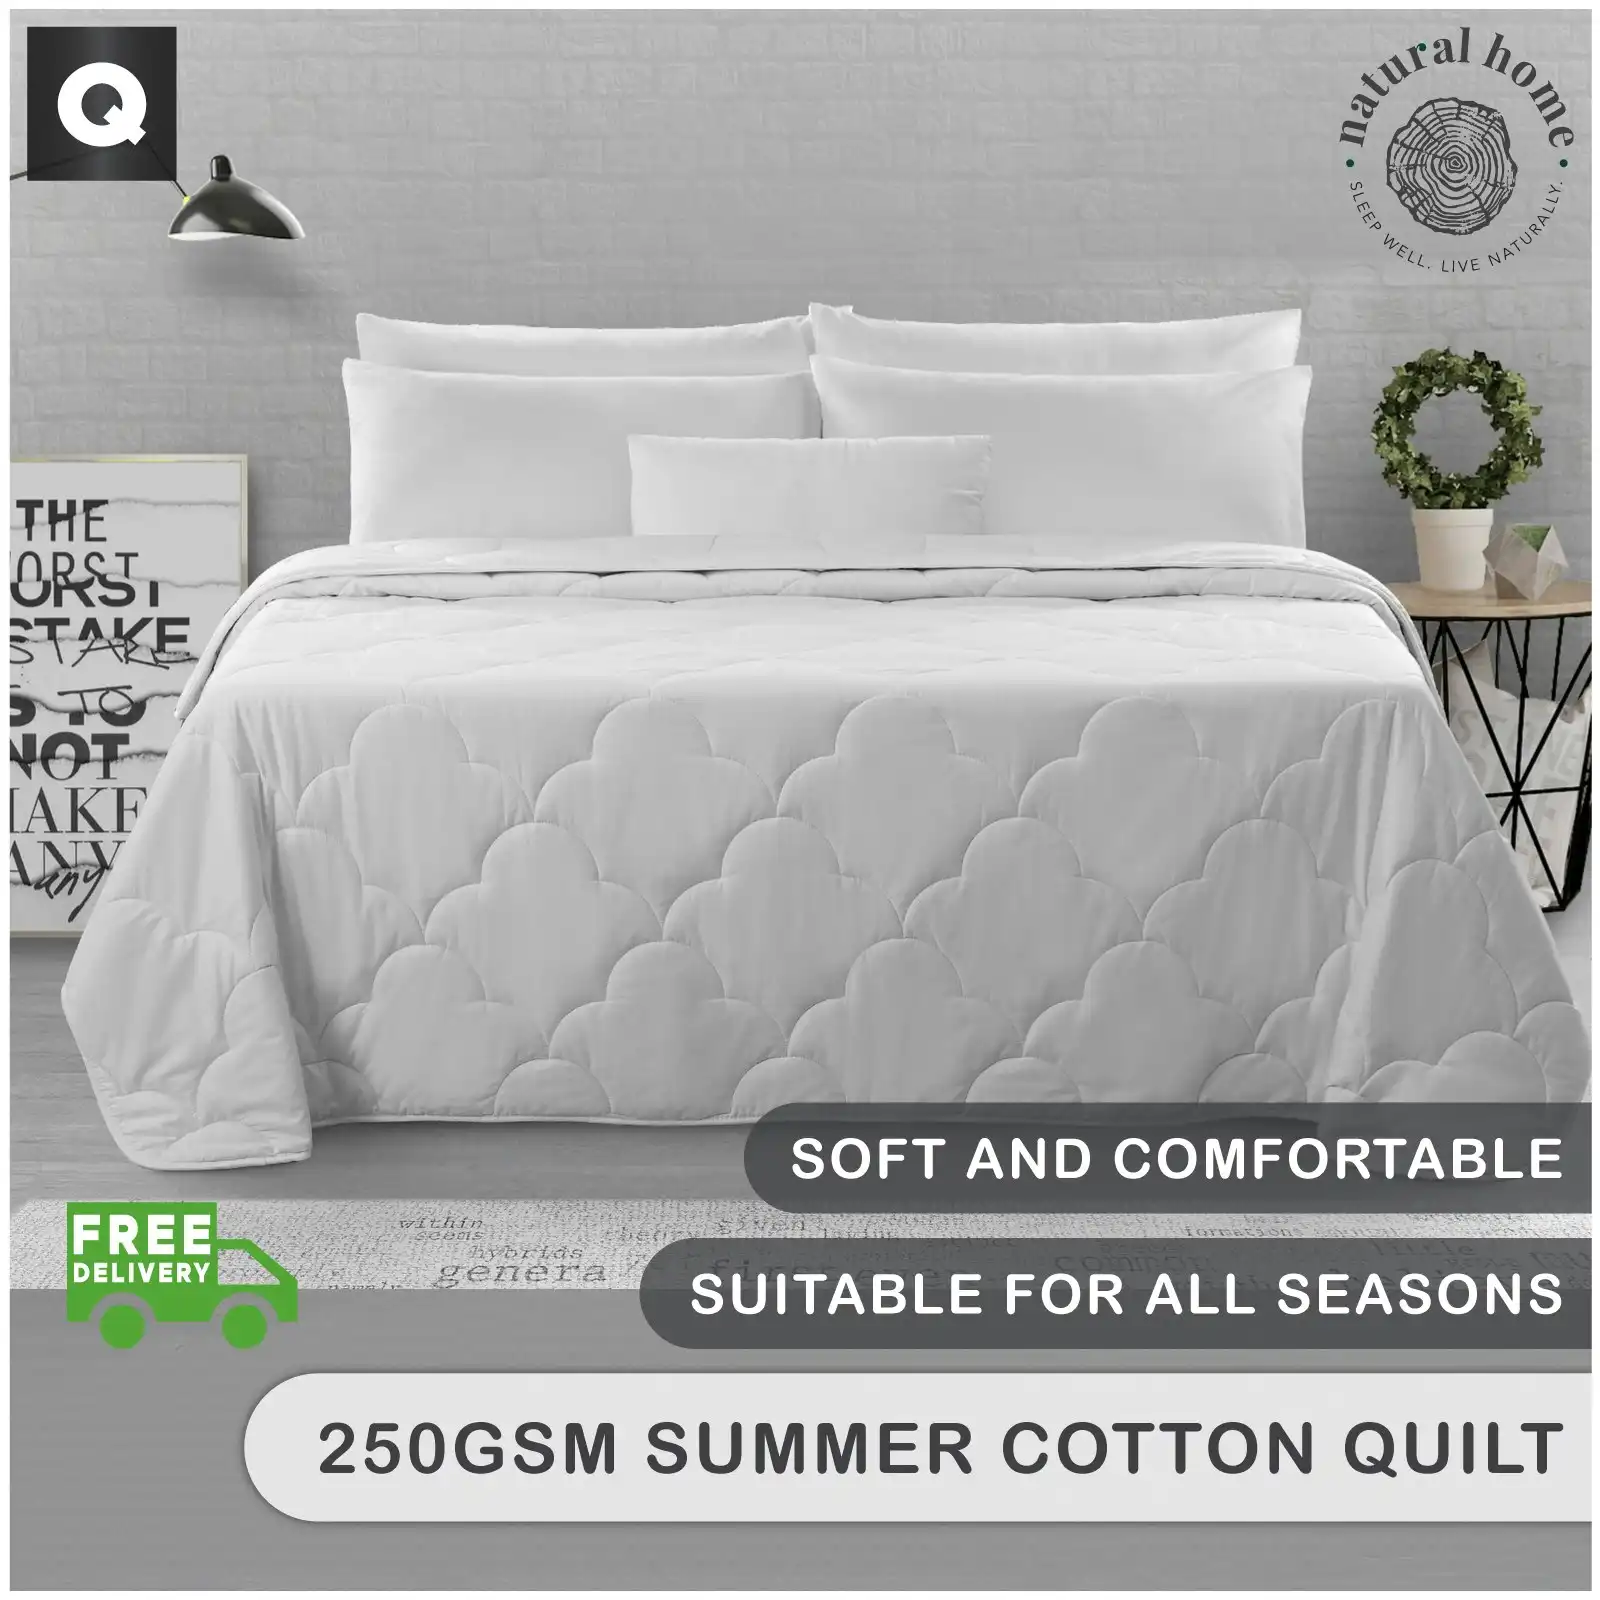 Natural Home Summer Cotton Quilt 250gsm - White - Queen Bed